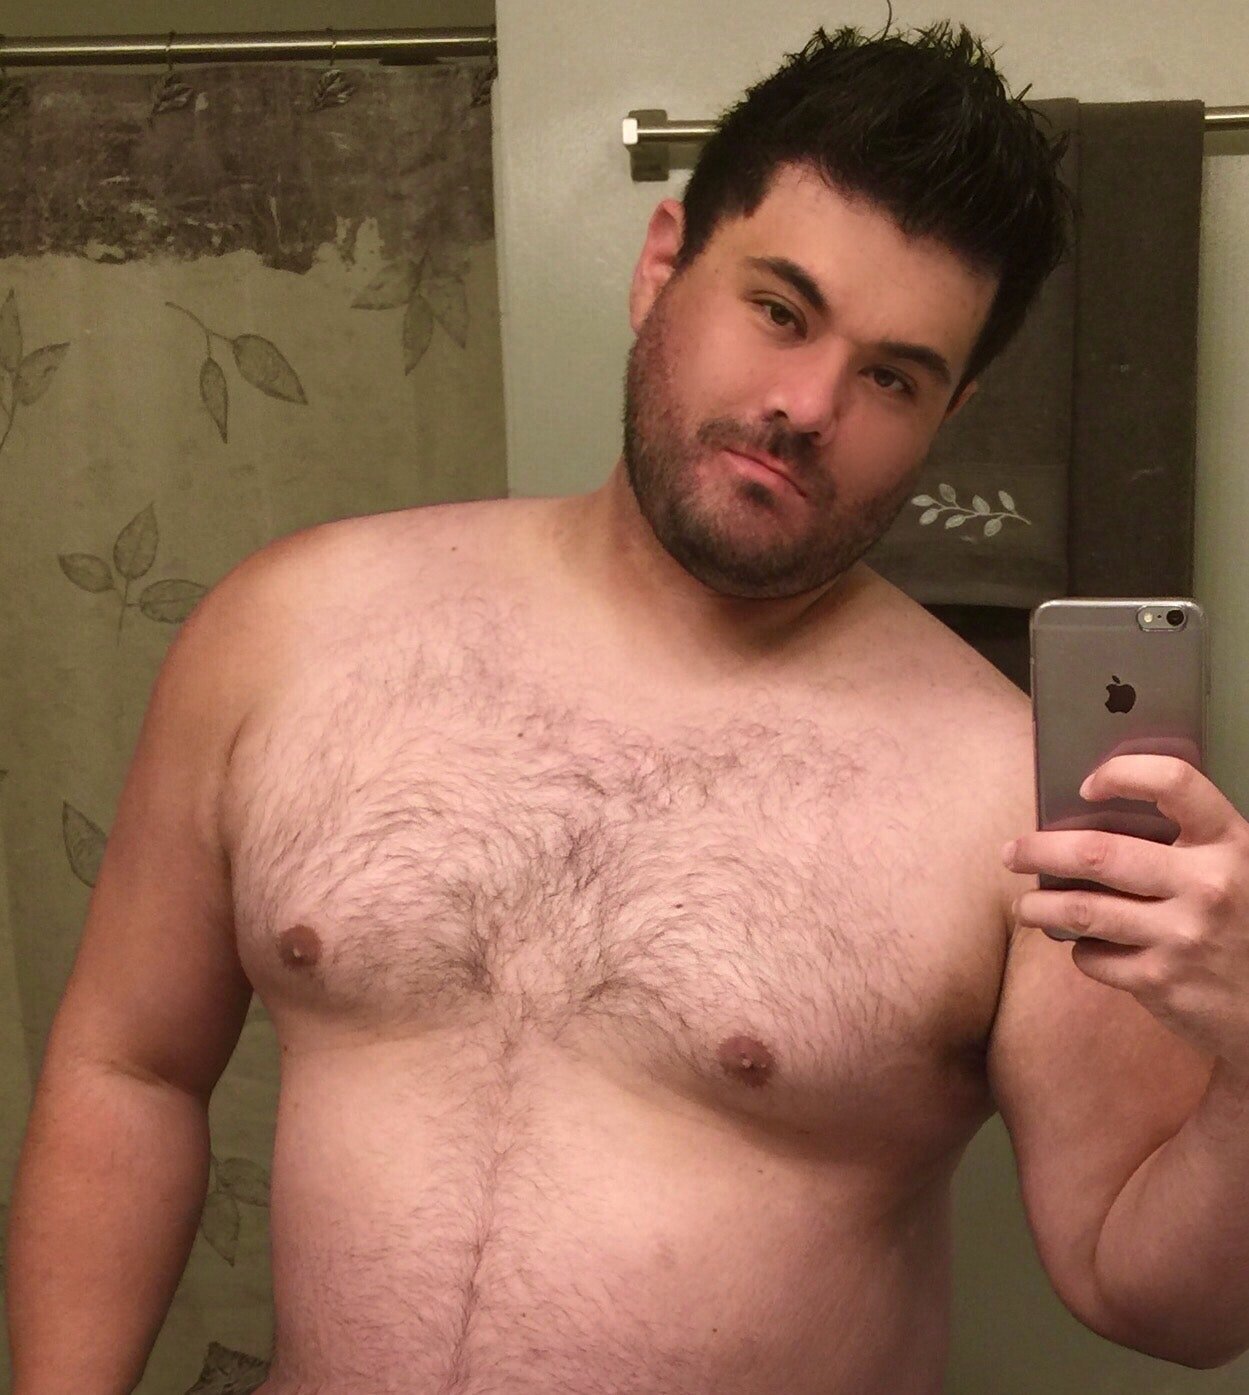 Not afraid to show off my body anymore. Feeling pretty sexy.